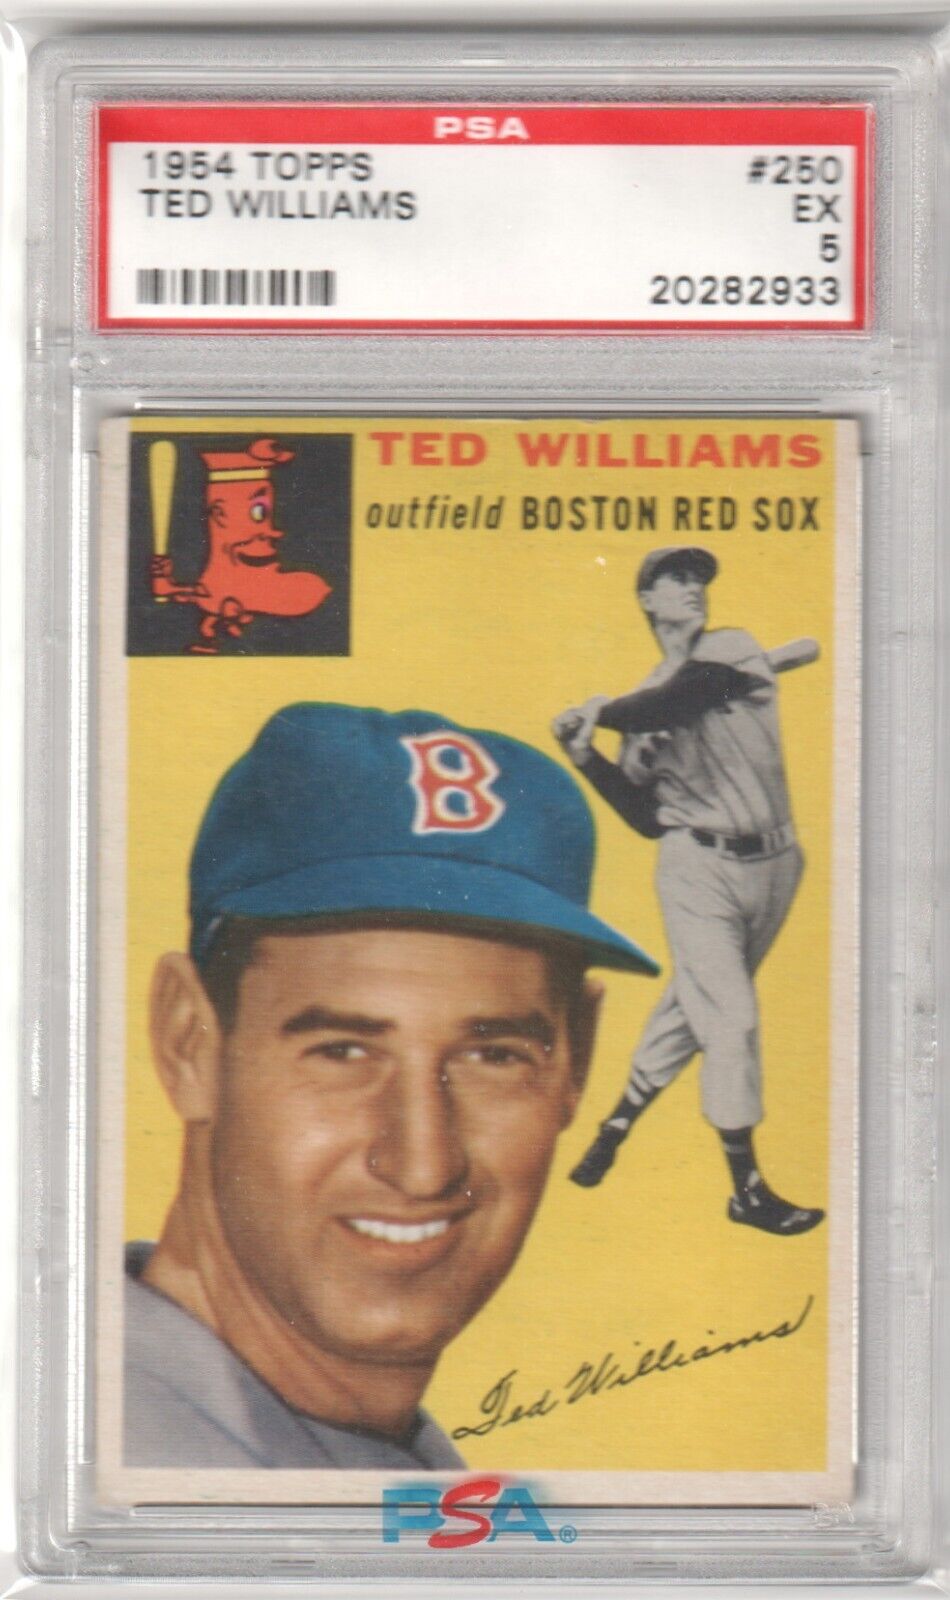 TED WILLIAMS 1954 Topps #250 PSA 5 EX - RED SOX